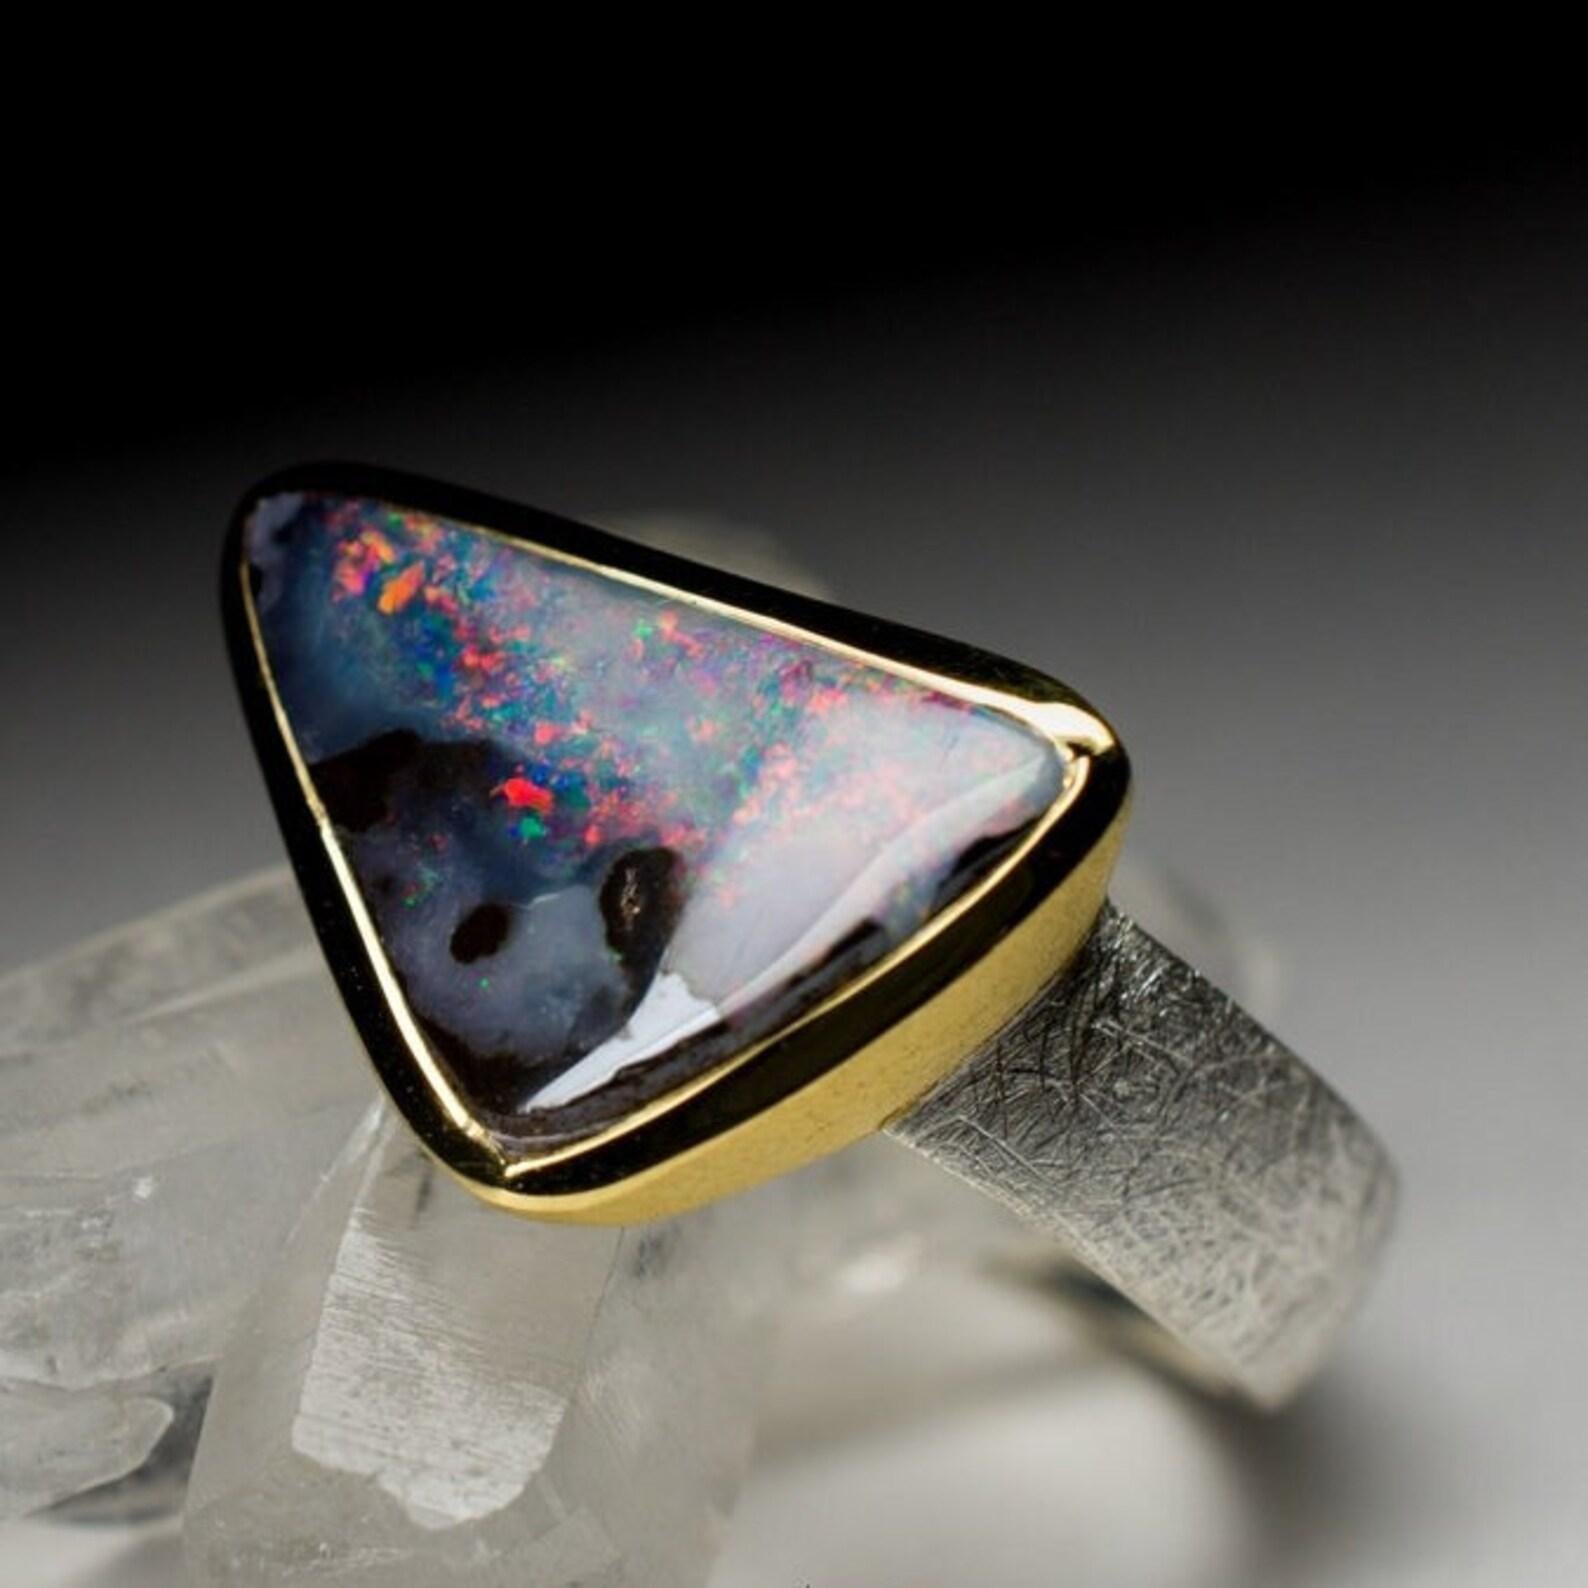 Vintage 18K yellow gold plated and matte finish silver ring with natural Australian Boulder Opal
opal origin - Lightning Ridge, Australia 
boulder opal measures  - 0.16 x 0.35 x 0.63 in / 4 х 9 х 16 mm
weight of the ring - 5.59 grams
ring size - 8.5